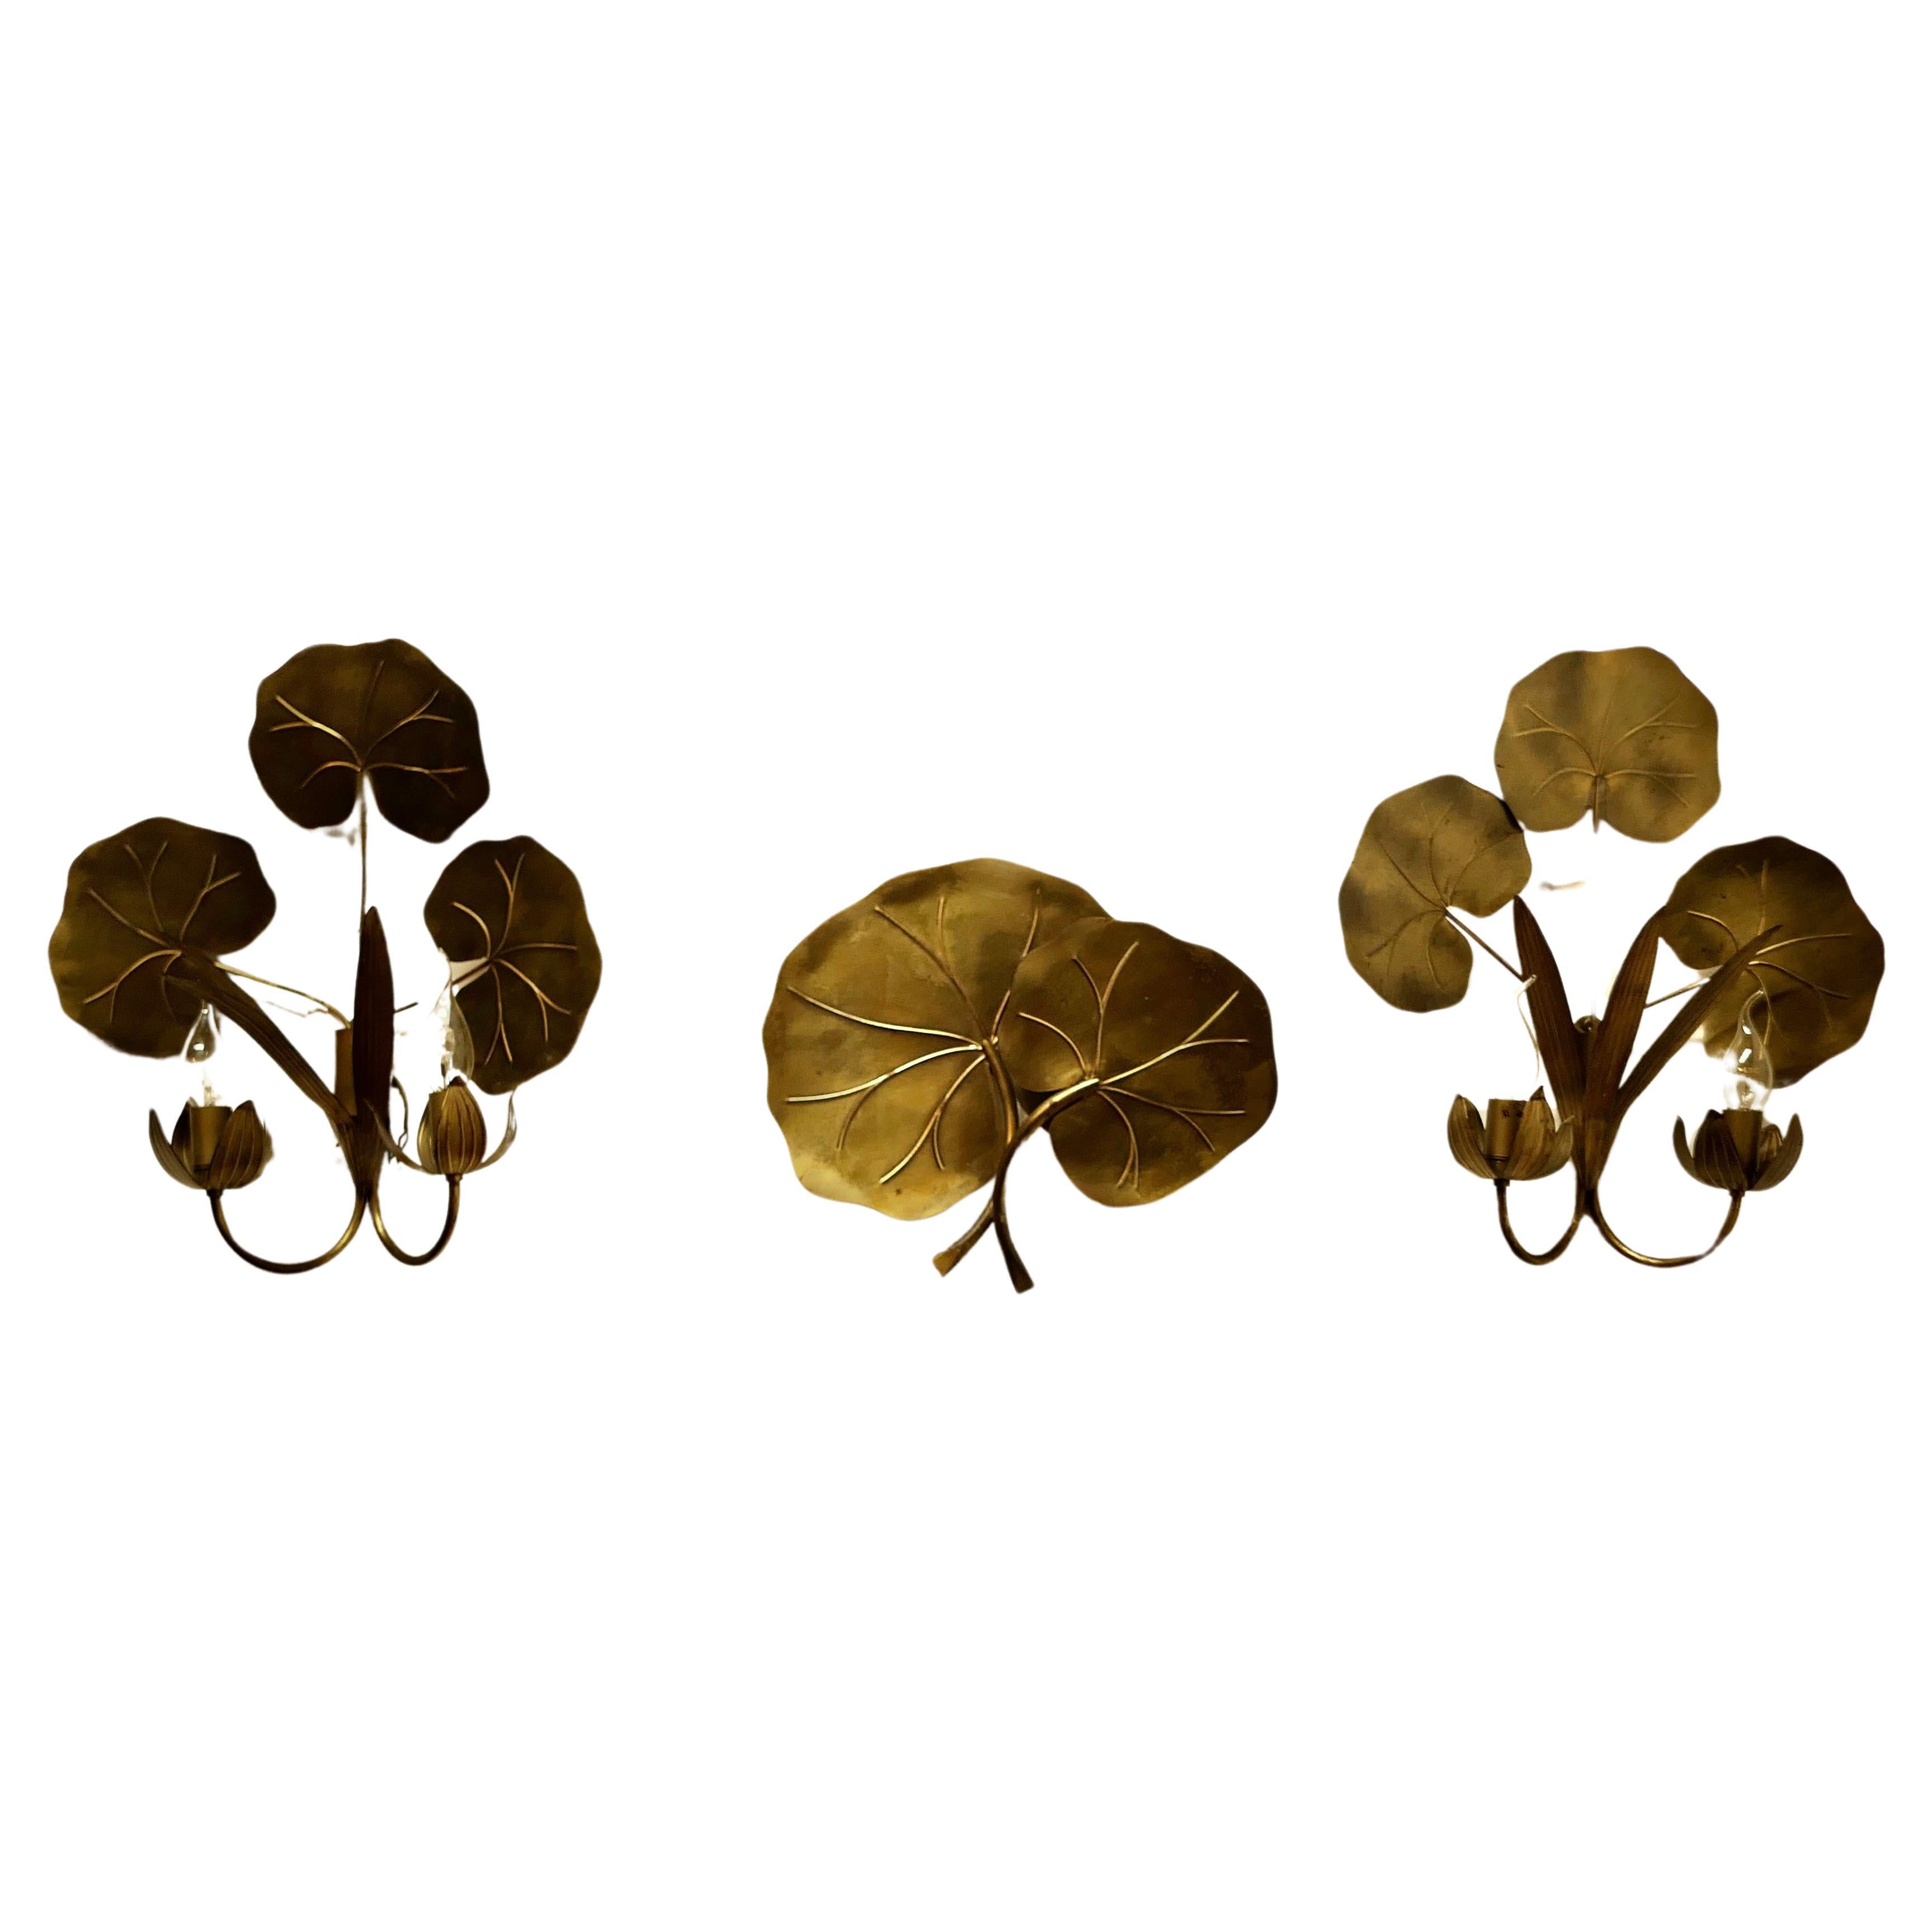 A Set of 3 of French Gilded Brass Wall Lights  These are very pretty set of wall